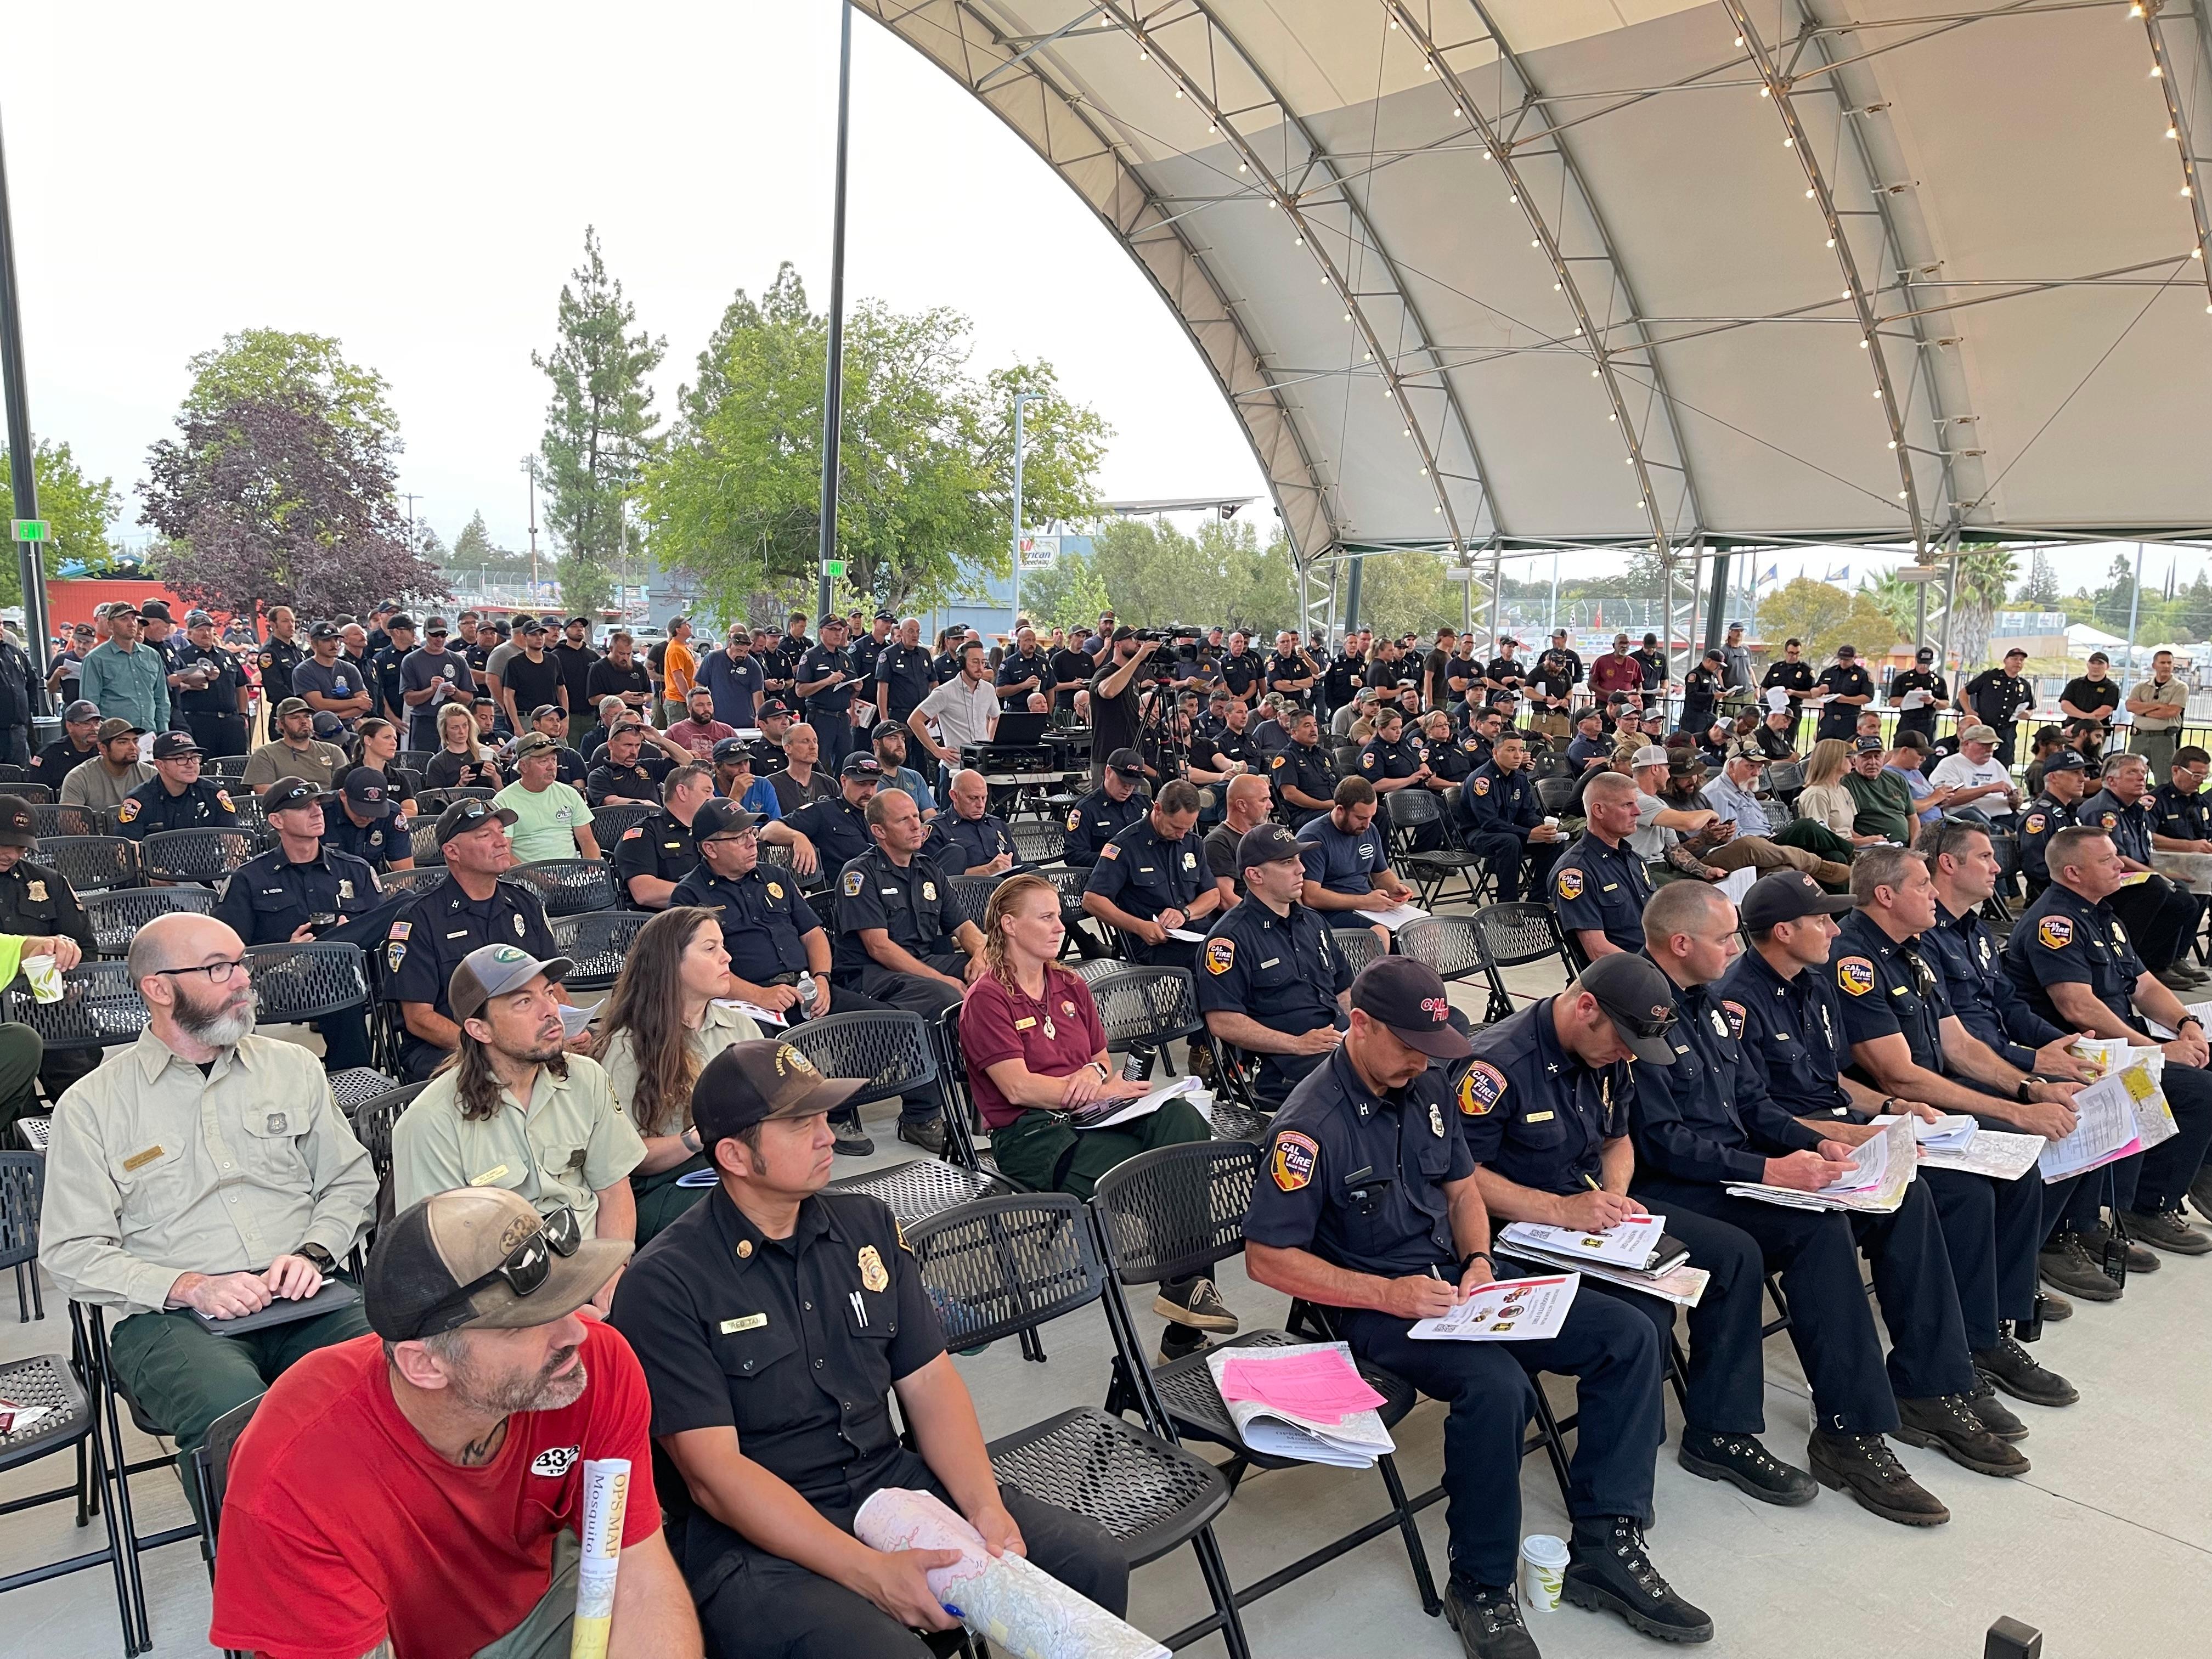 dozens of fire personnel assembled in a large, partially open outdoor venue reflect during a nine eleven remembrance